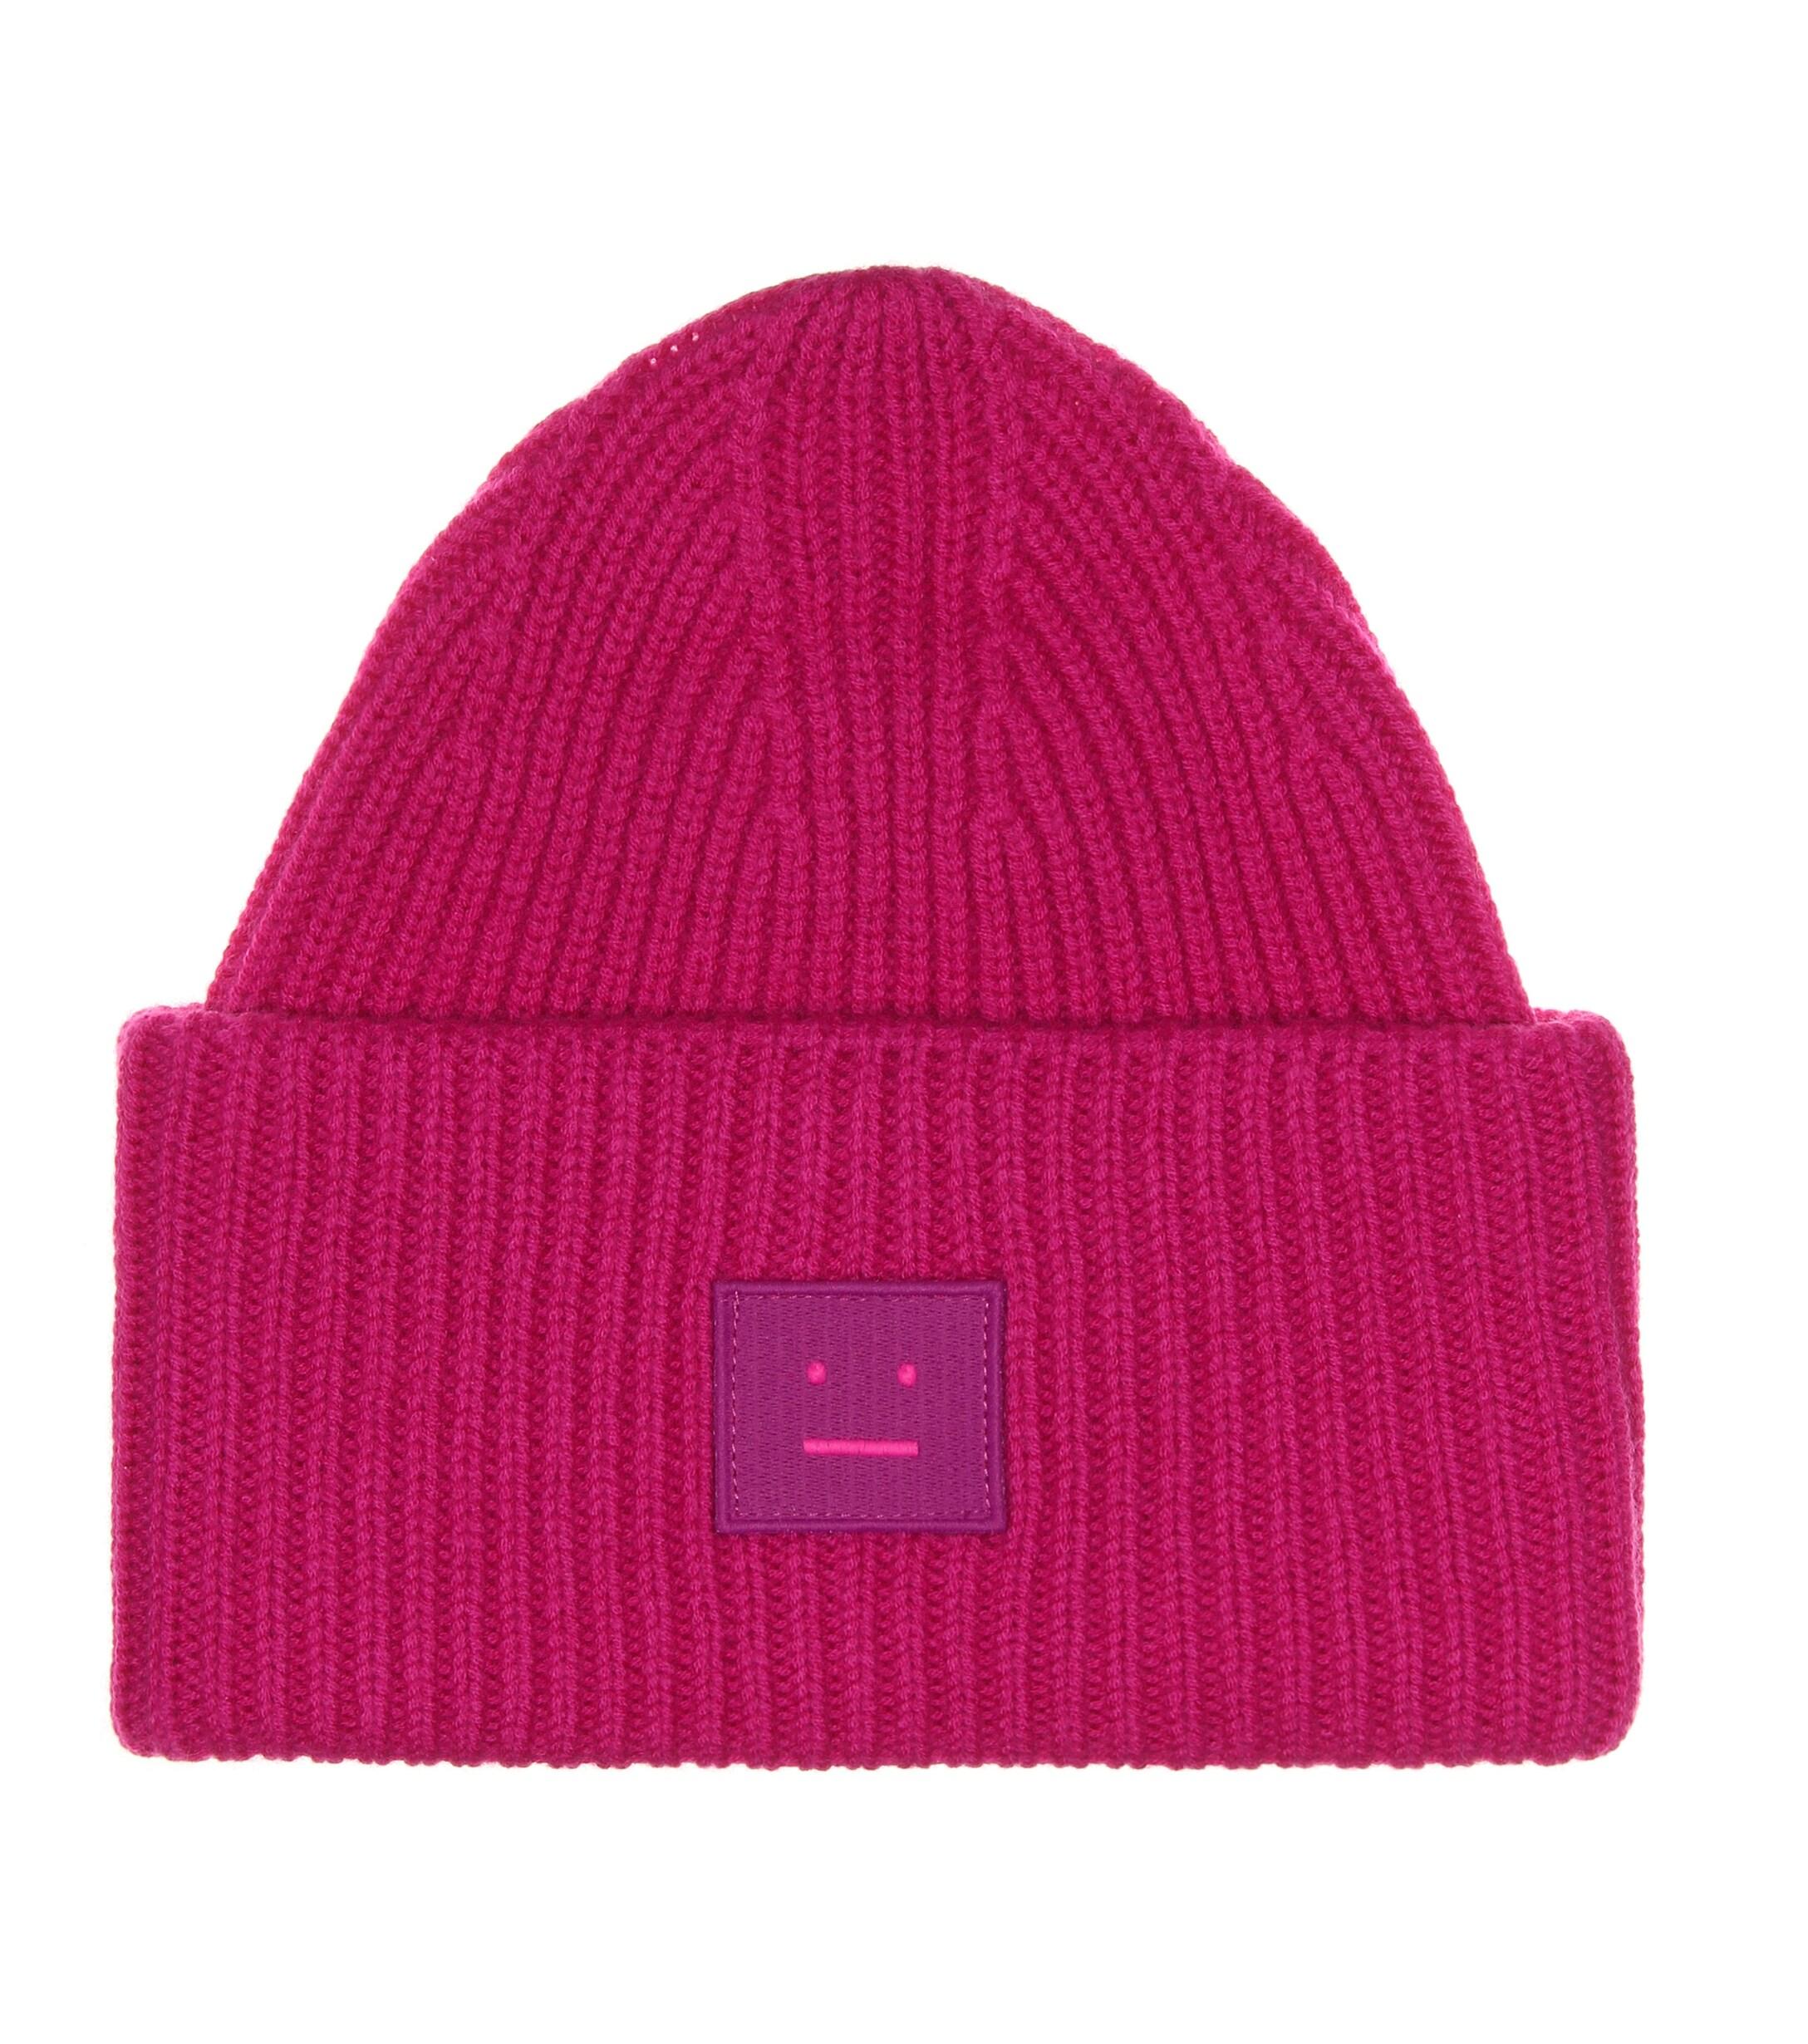 Acne Studios Face Wool Beanie in Pink - Lyst